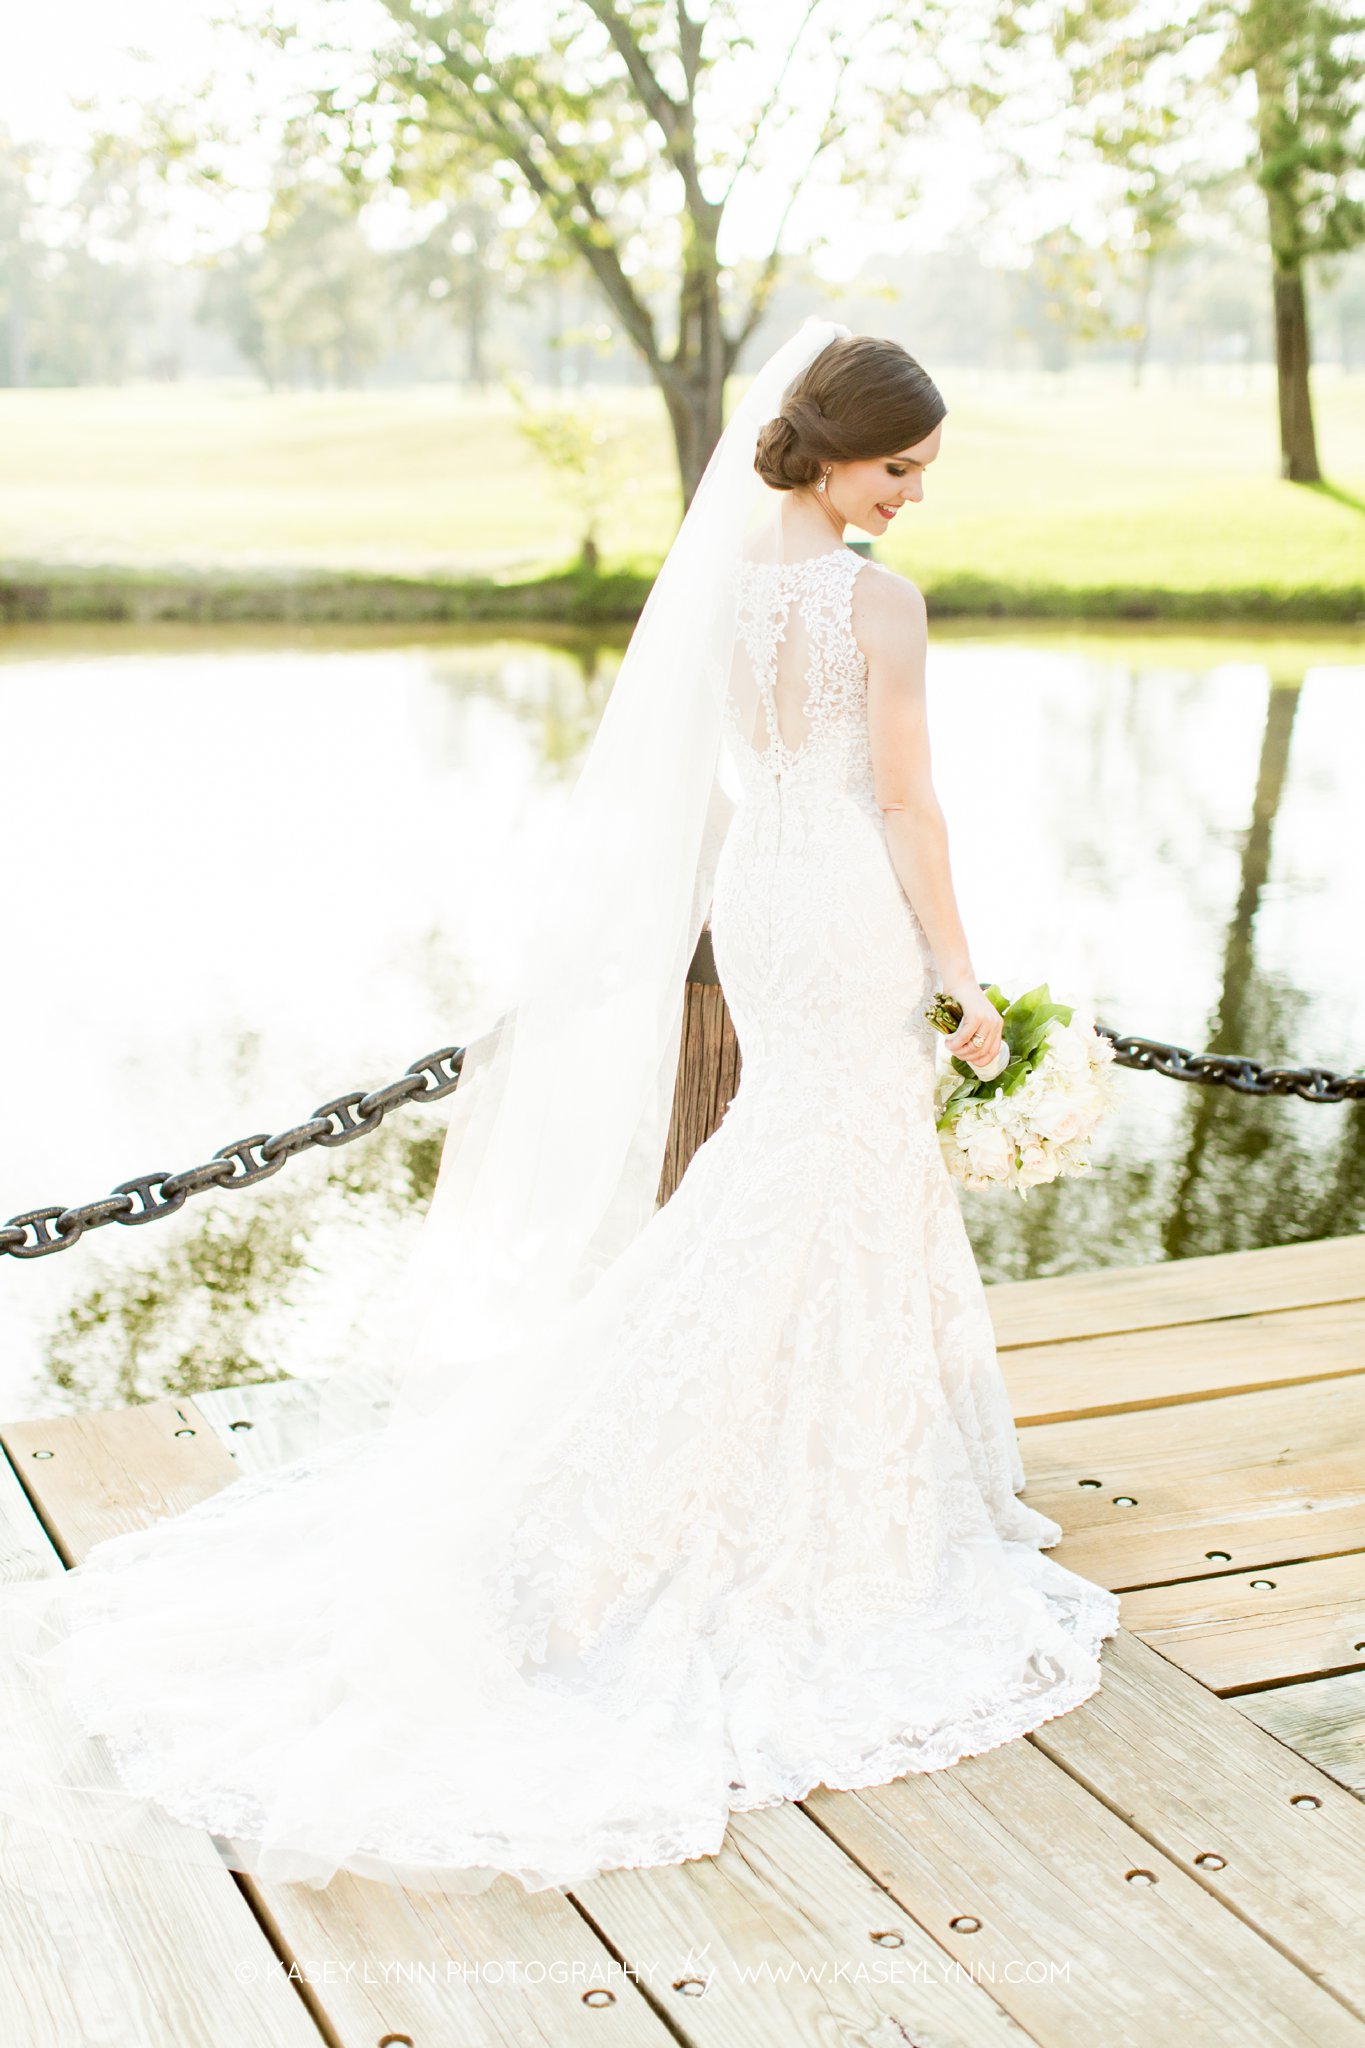 The Woodlands Resort and Conference Center Bridals / Kasey Lynn Photography